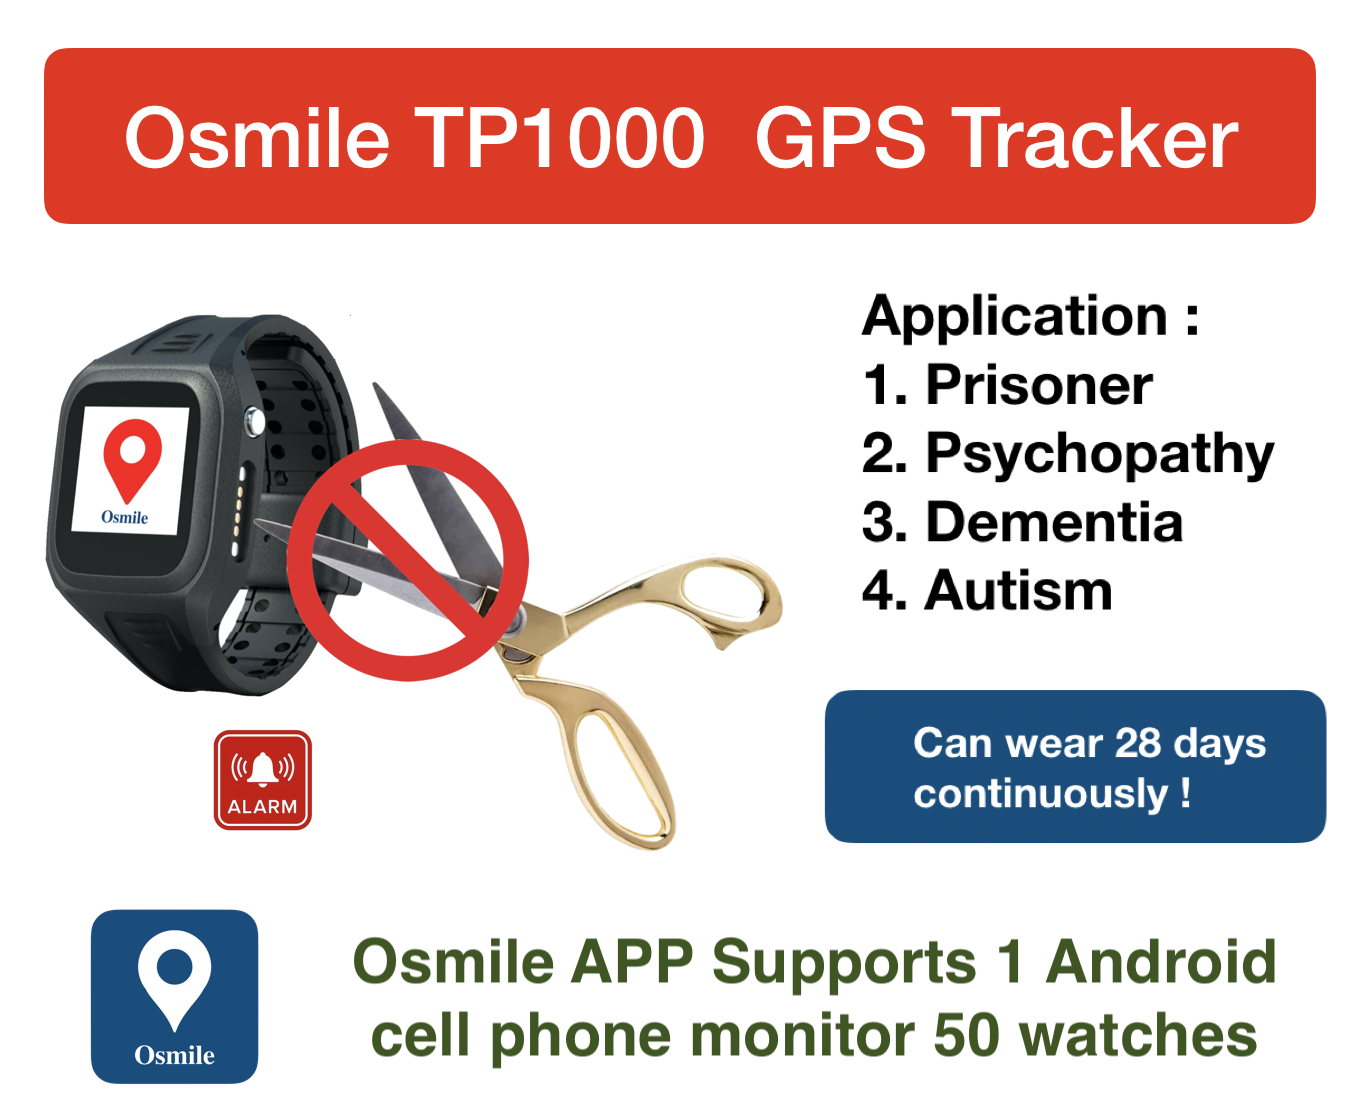 Osmile TP1000 for Prisoner, Offender, Psychopathy, Dementia, Alzheimer, Autism (Can wear 24 hrs a Day, 7 Days a Week)